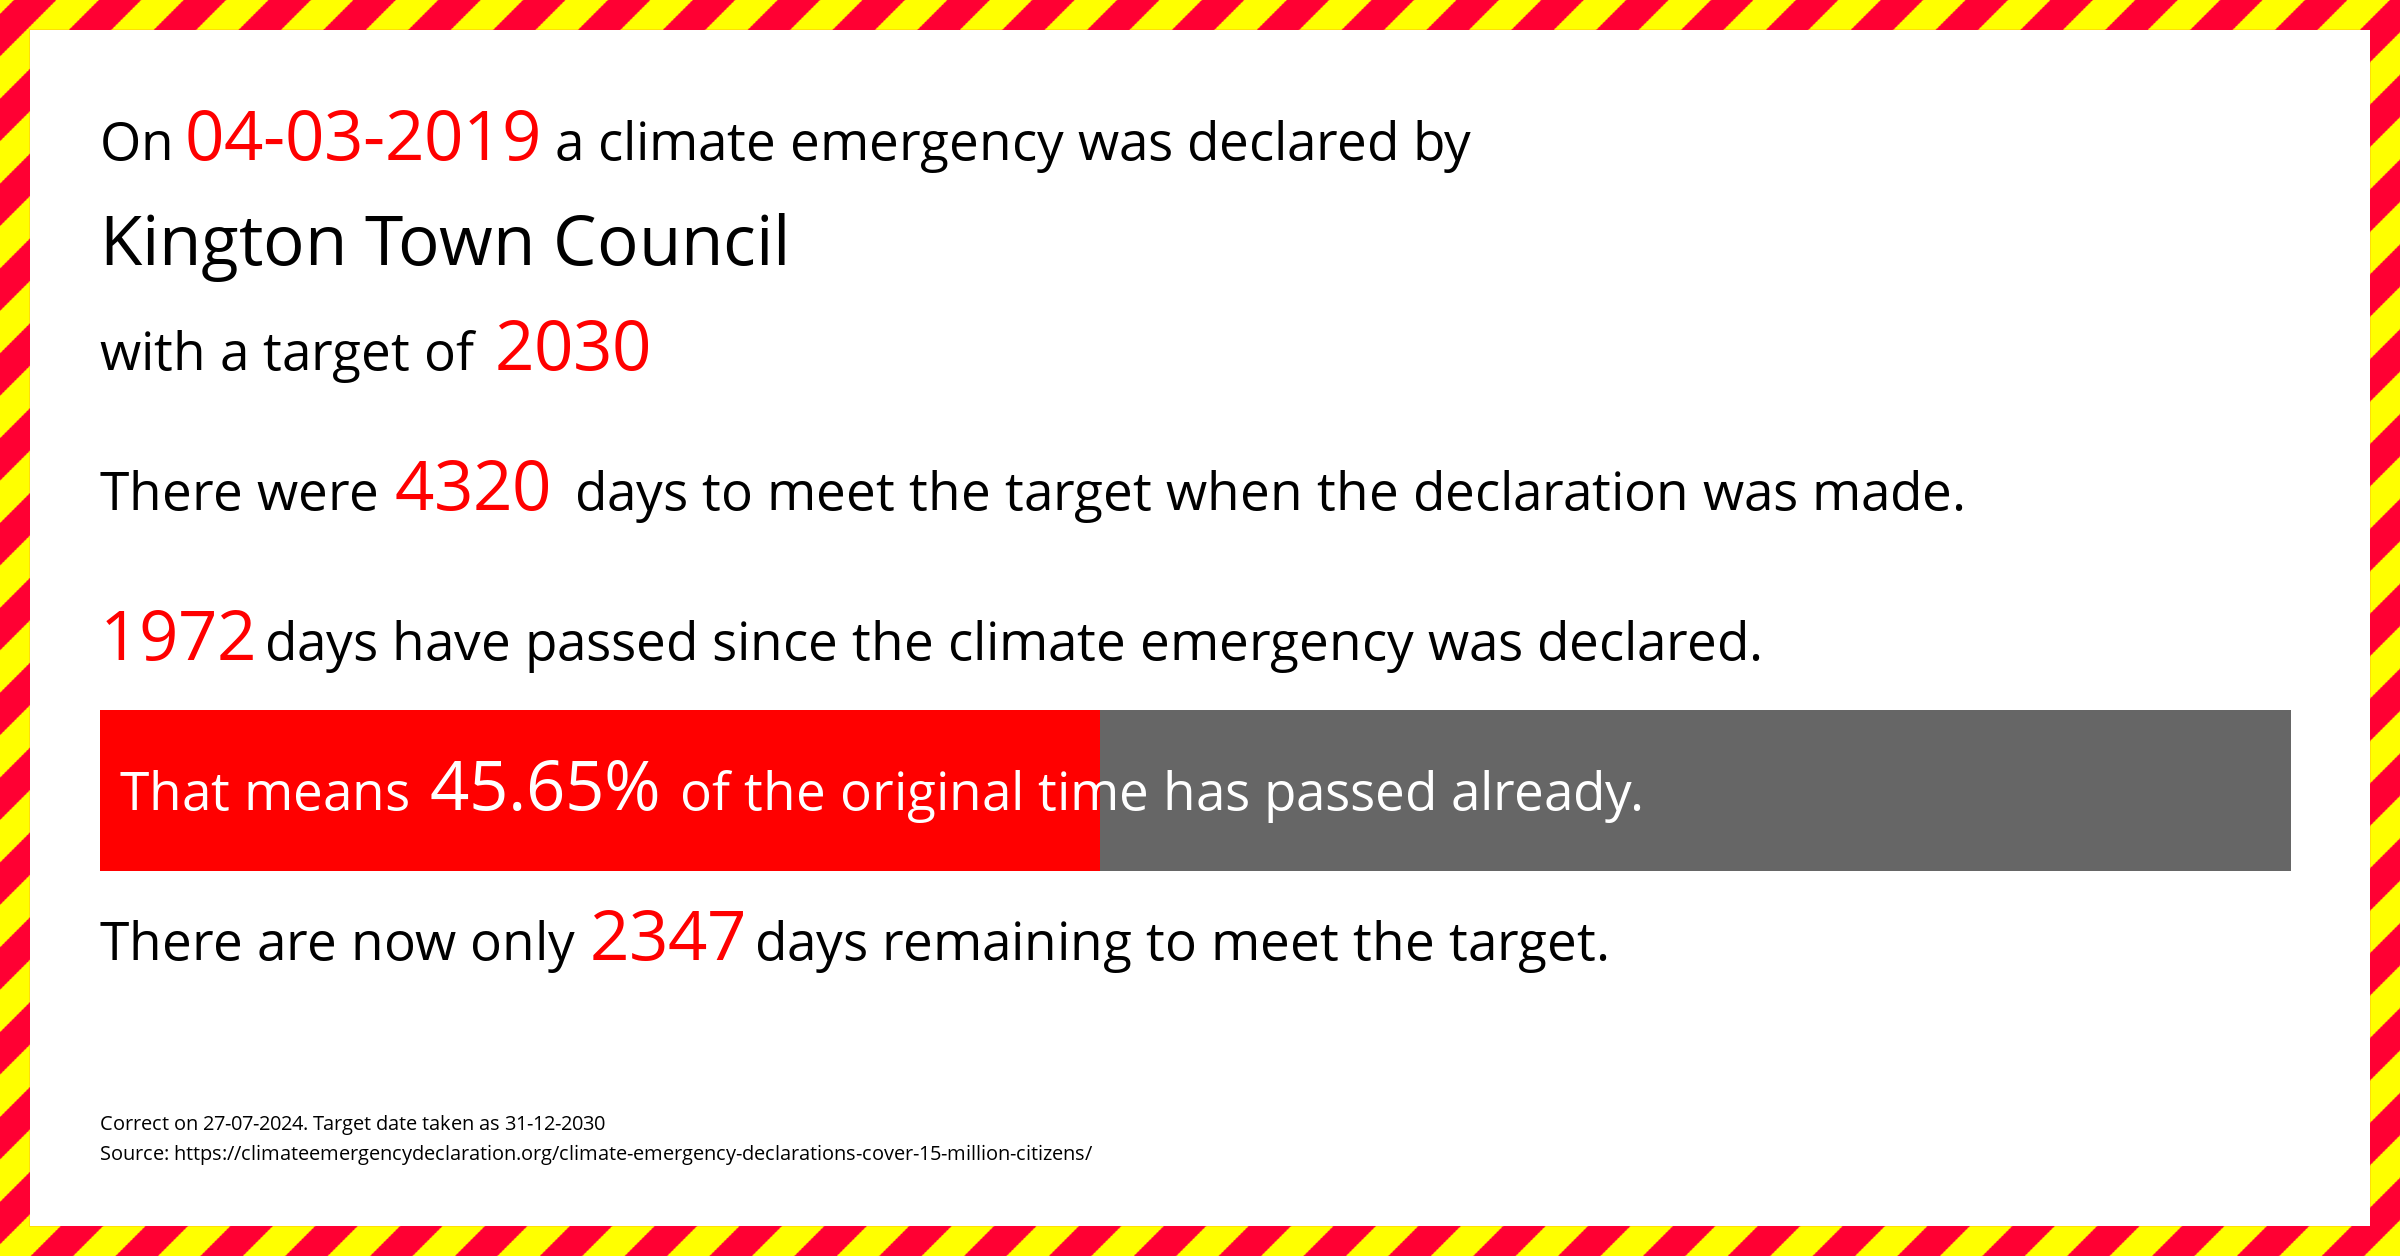 Kington Town Council declared a Climate emergency on Monday 4th March 2019, with a target of 2030.